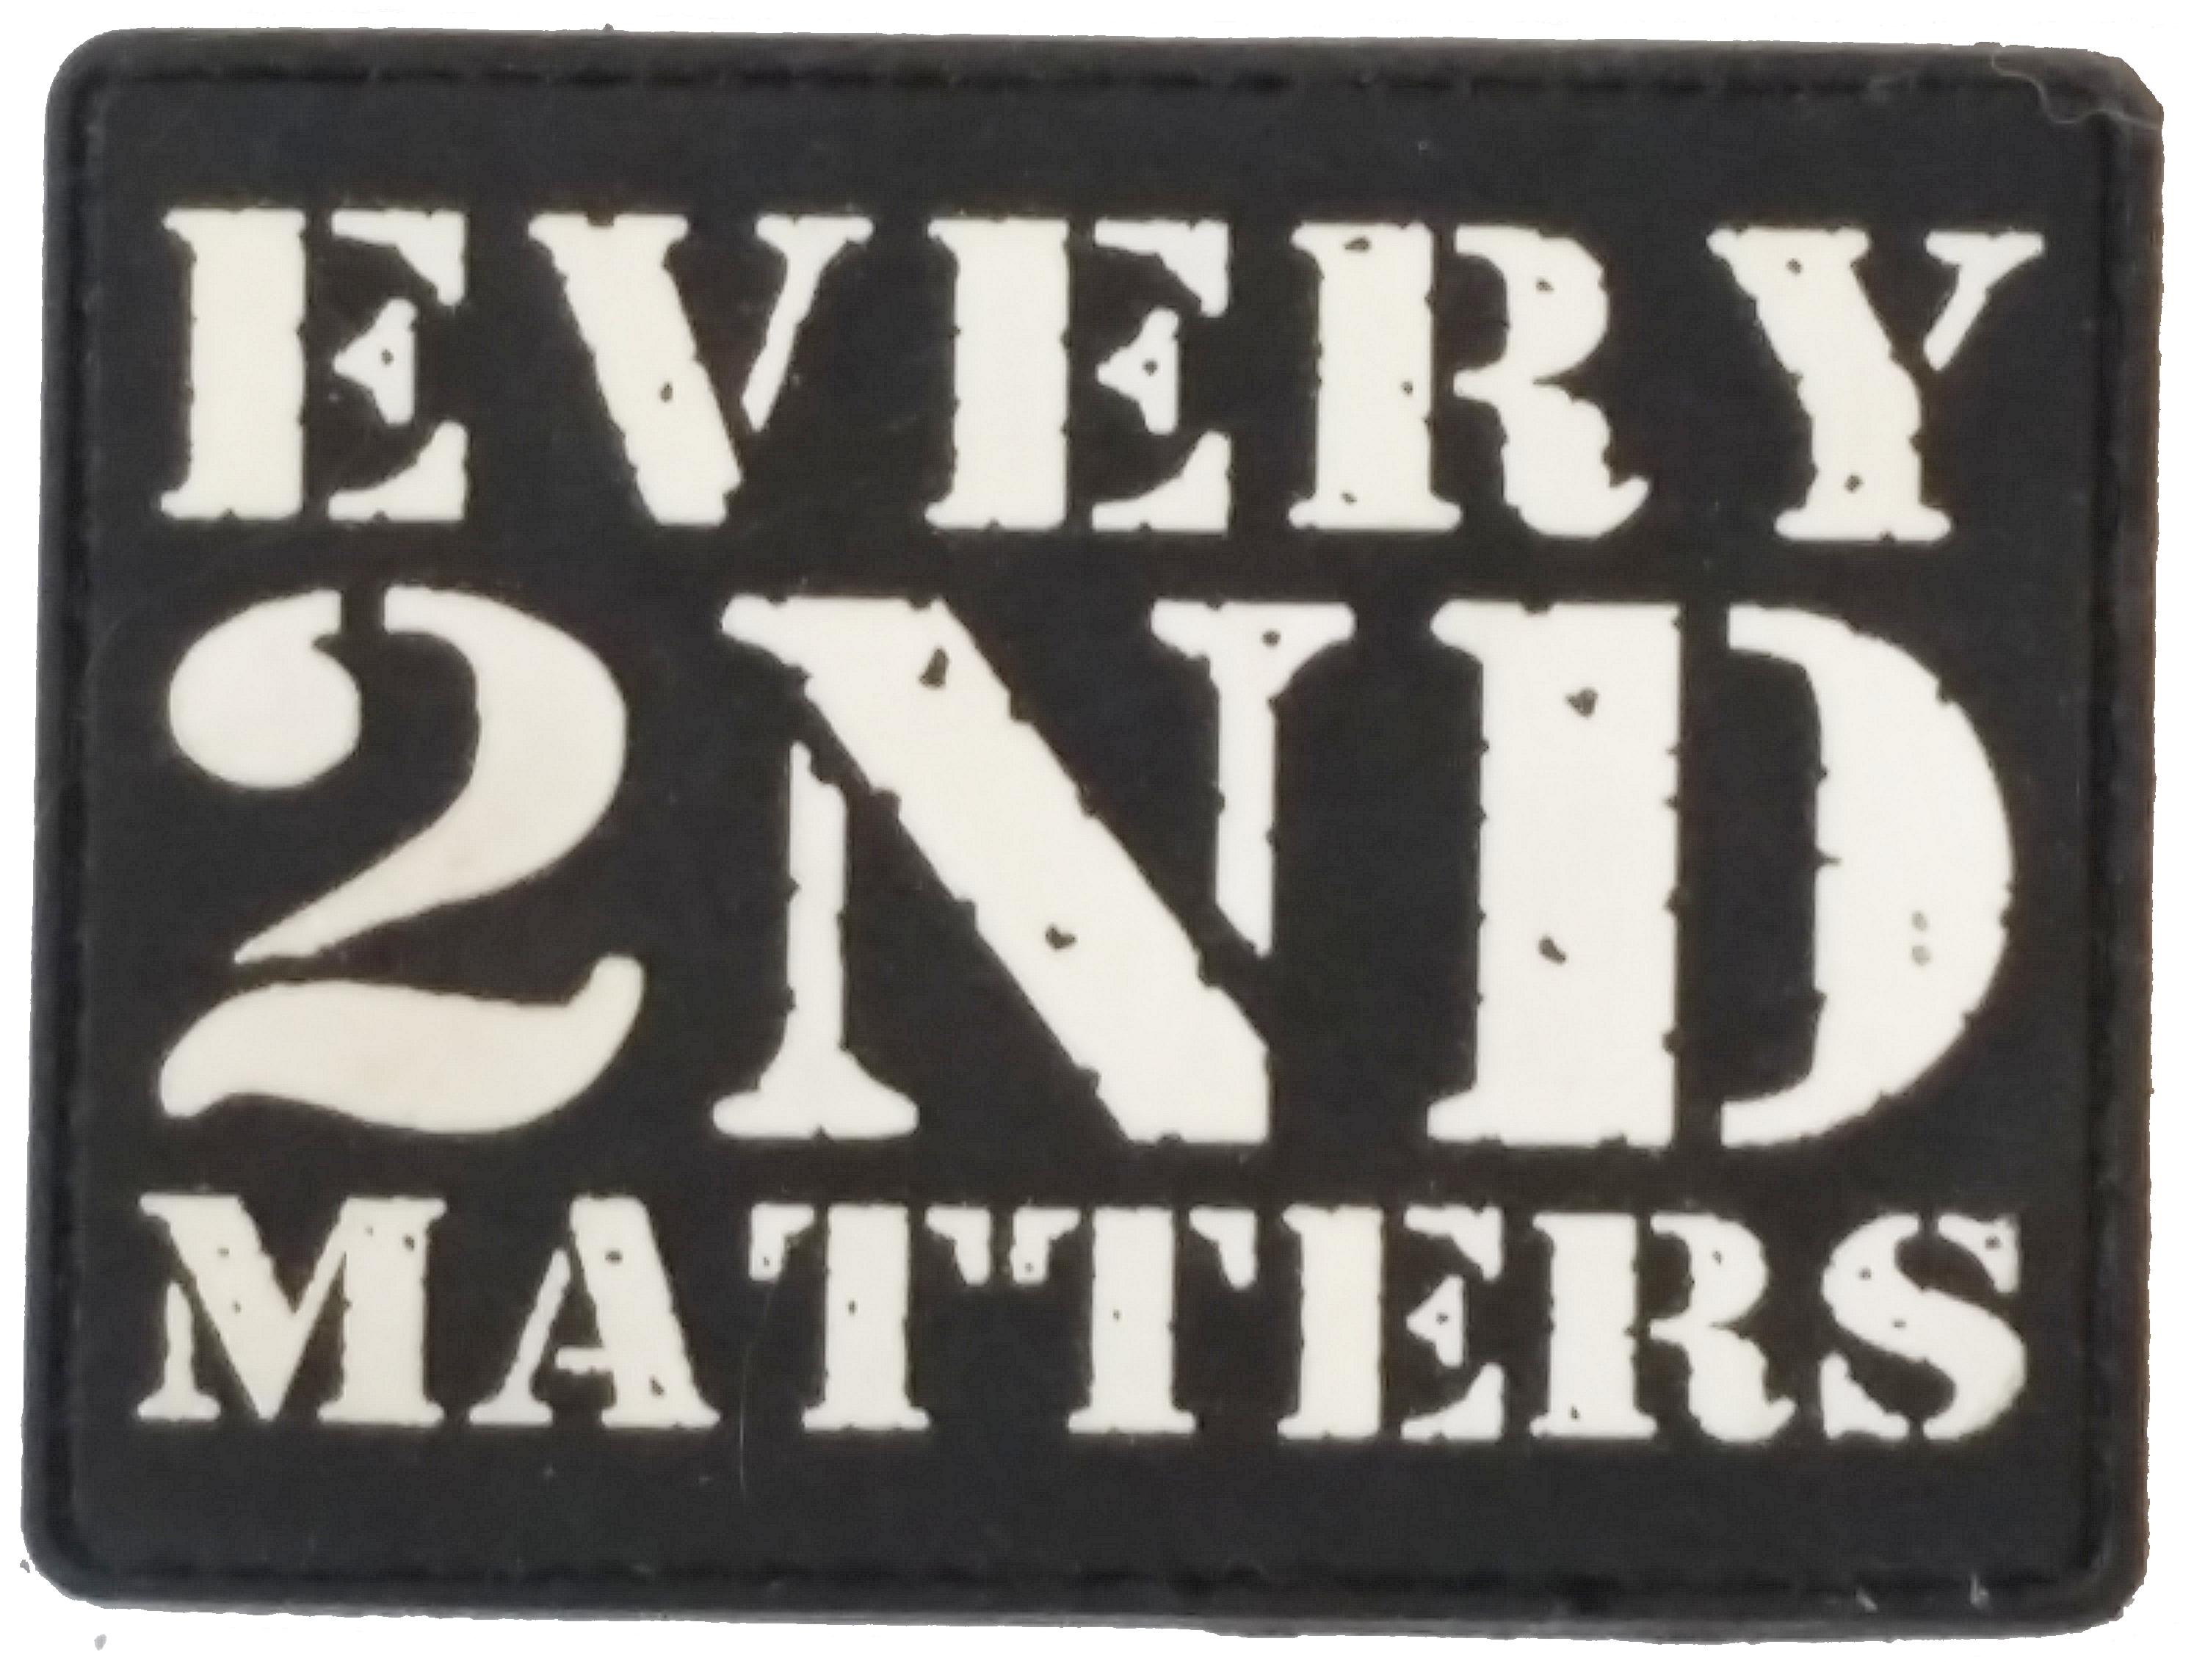 Every 2nd Matters 2015 - 4th gen - black  white 